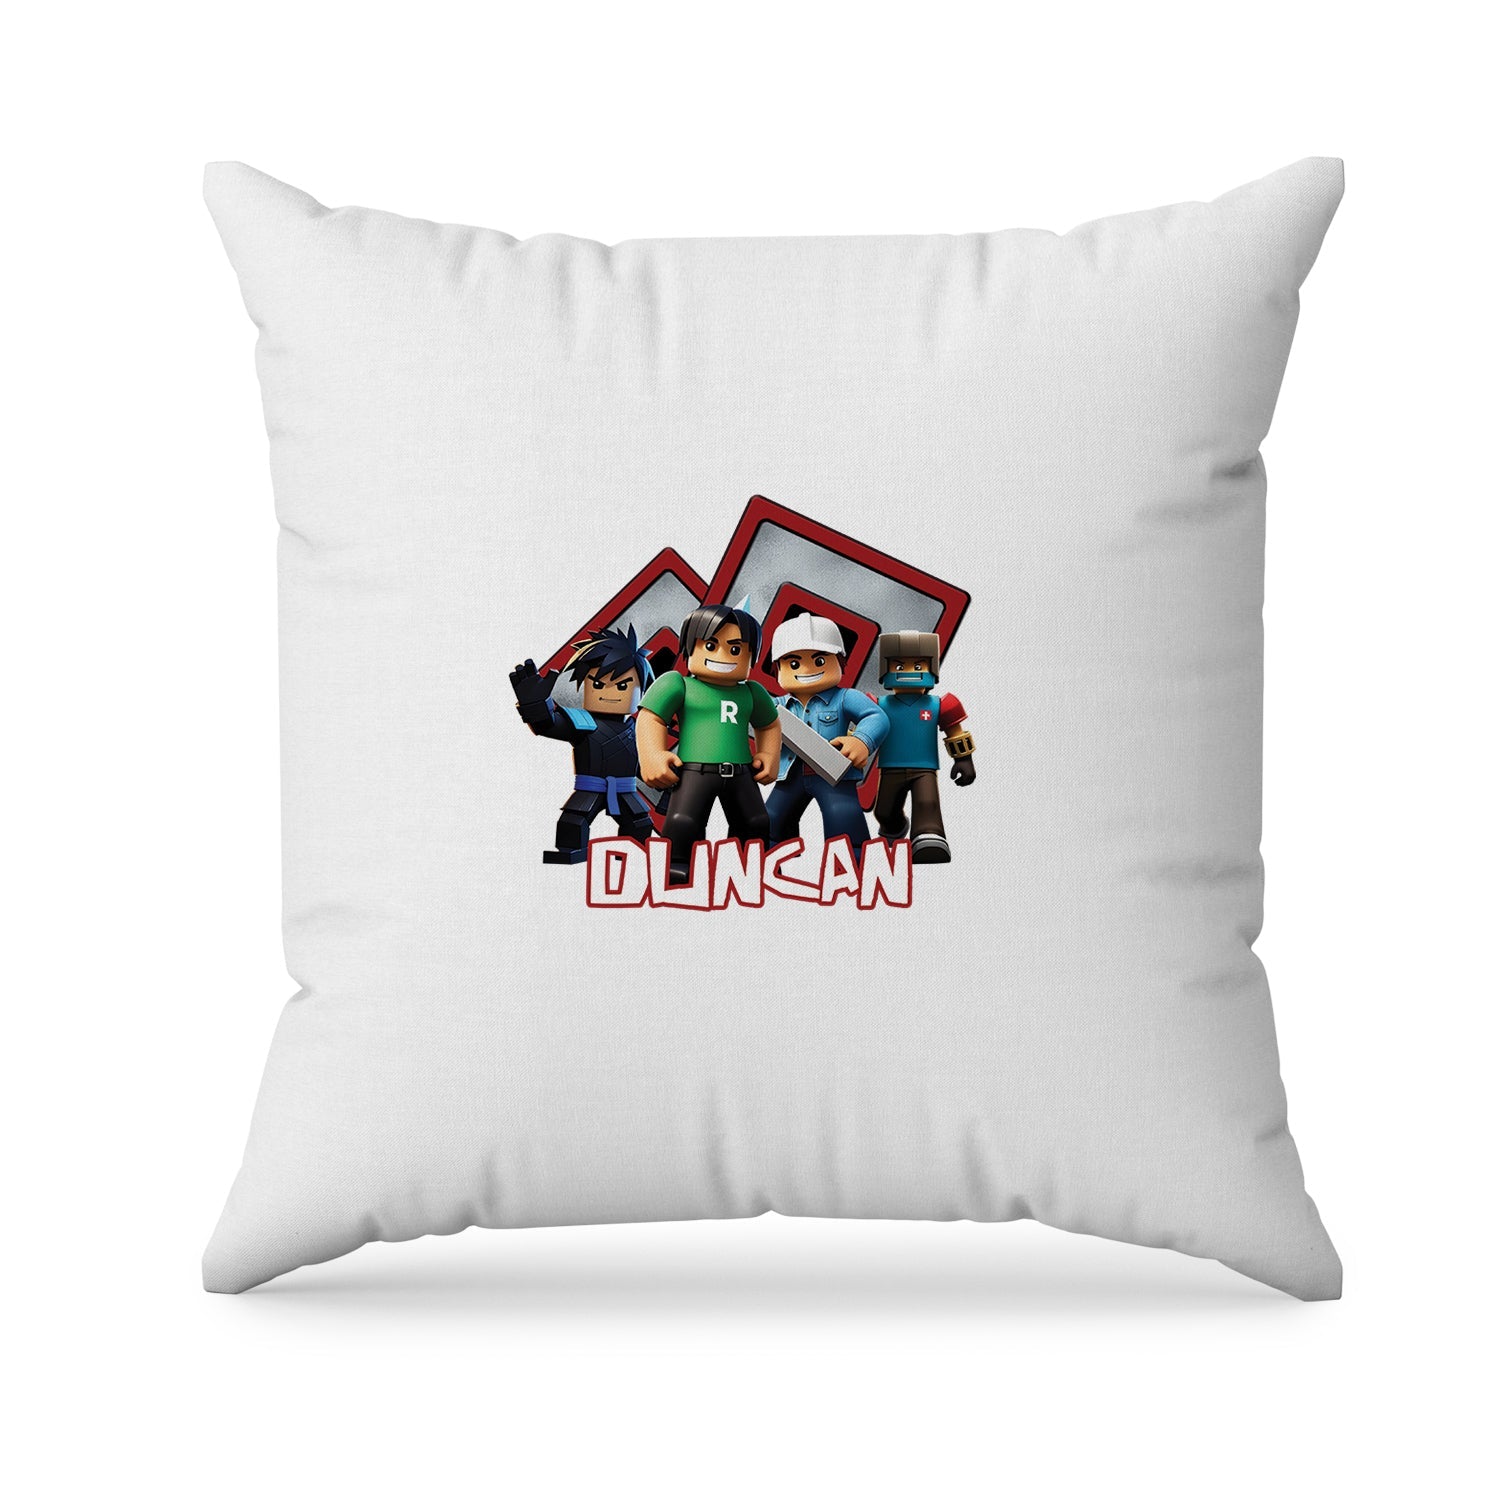 Sublimation pillowcase with Roblox design